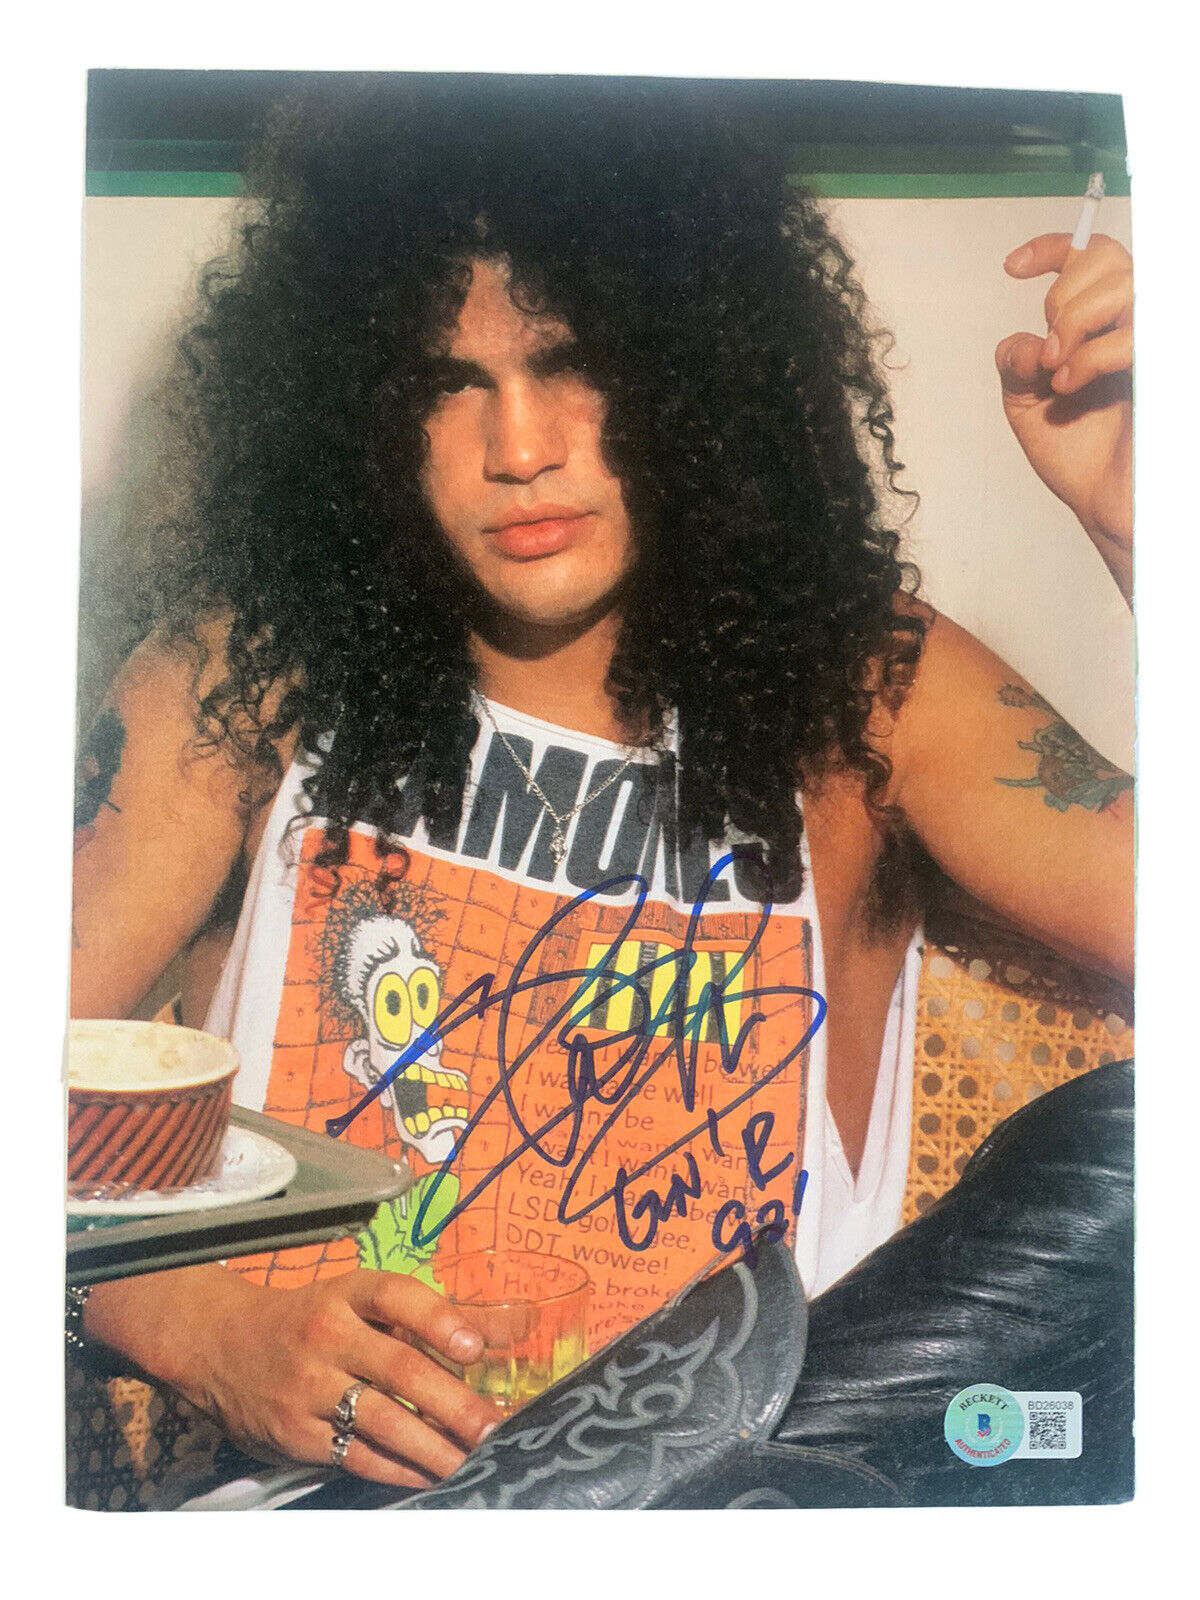 Slash Guns & Roses Signed Autographed 8x11 Mag Page Photo Poster painting BAS Certified #1